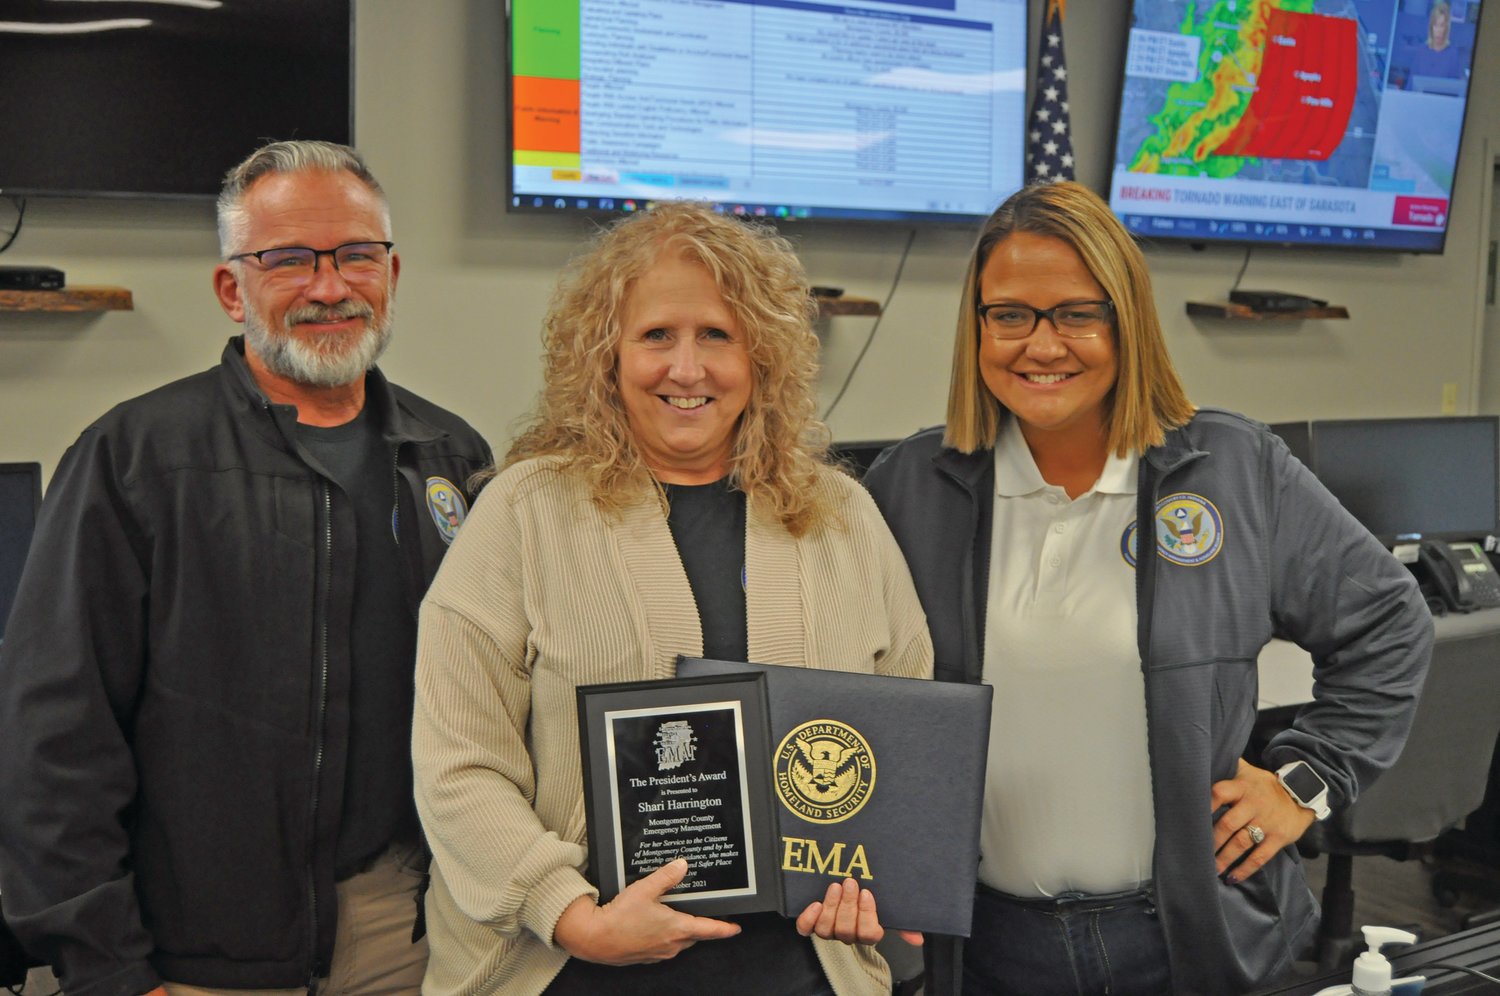 Montgomery County Emergency Management and Homeland Security Agency Director Shari Harrington, center, was recently recognized in 2021 by the Emergency Management Alliance of Indiana. She has worked for the county for 20 years and has resigned to take a position with the state emergency manage system.